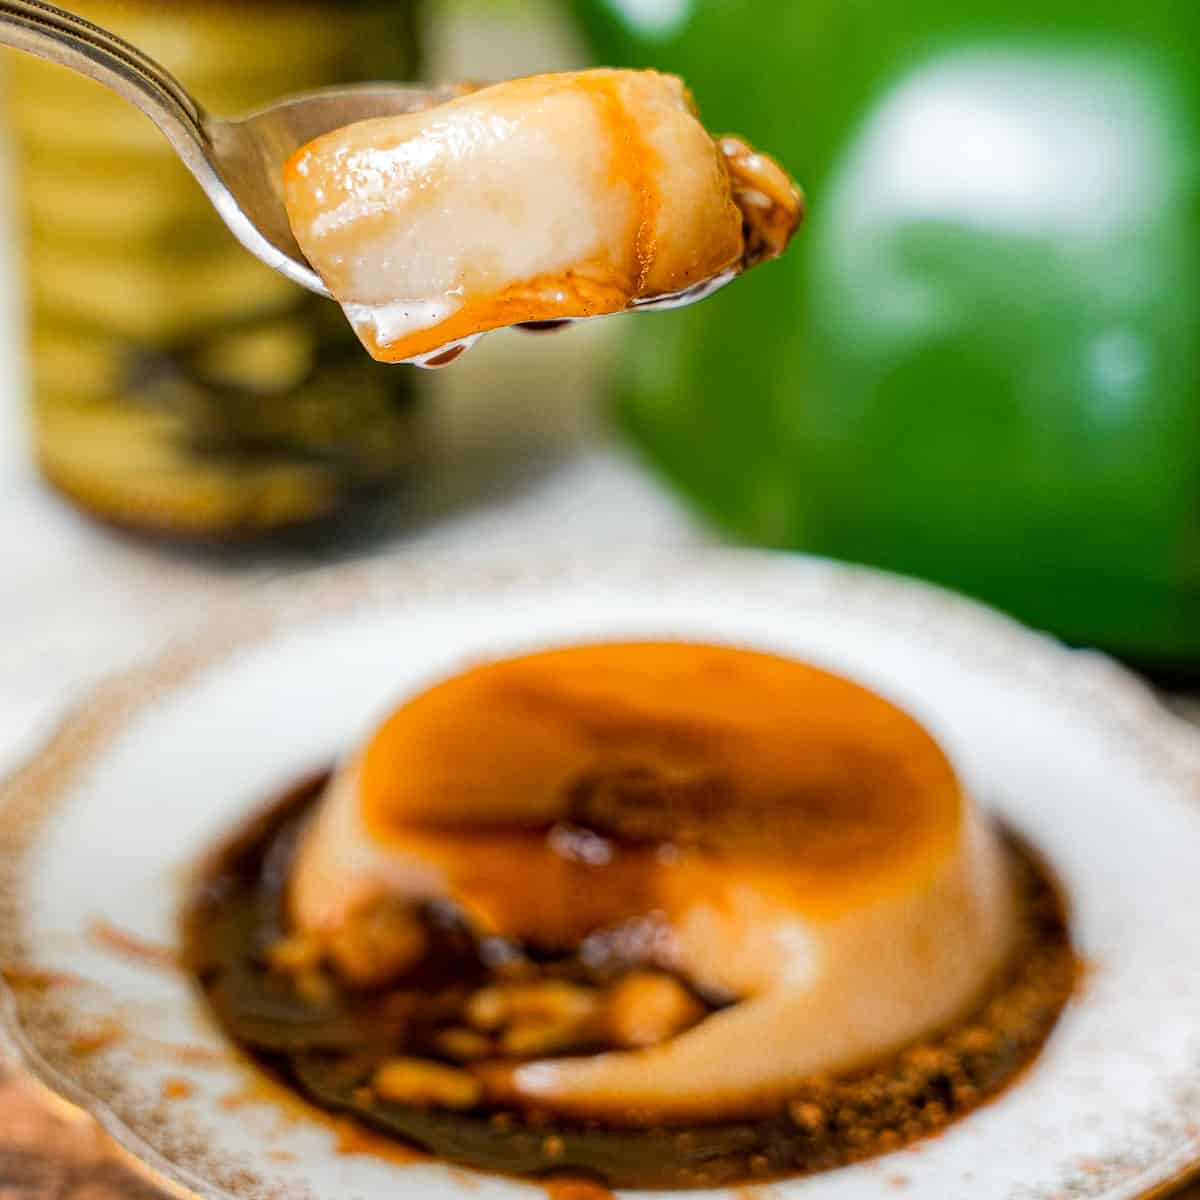 A spoonful of banh flan dripping with caramel is held over a plate with flan. A tea pot and glass can be seen in the background.